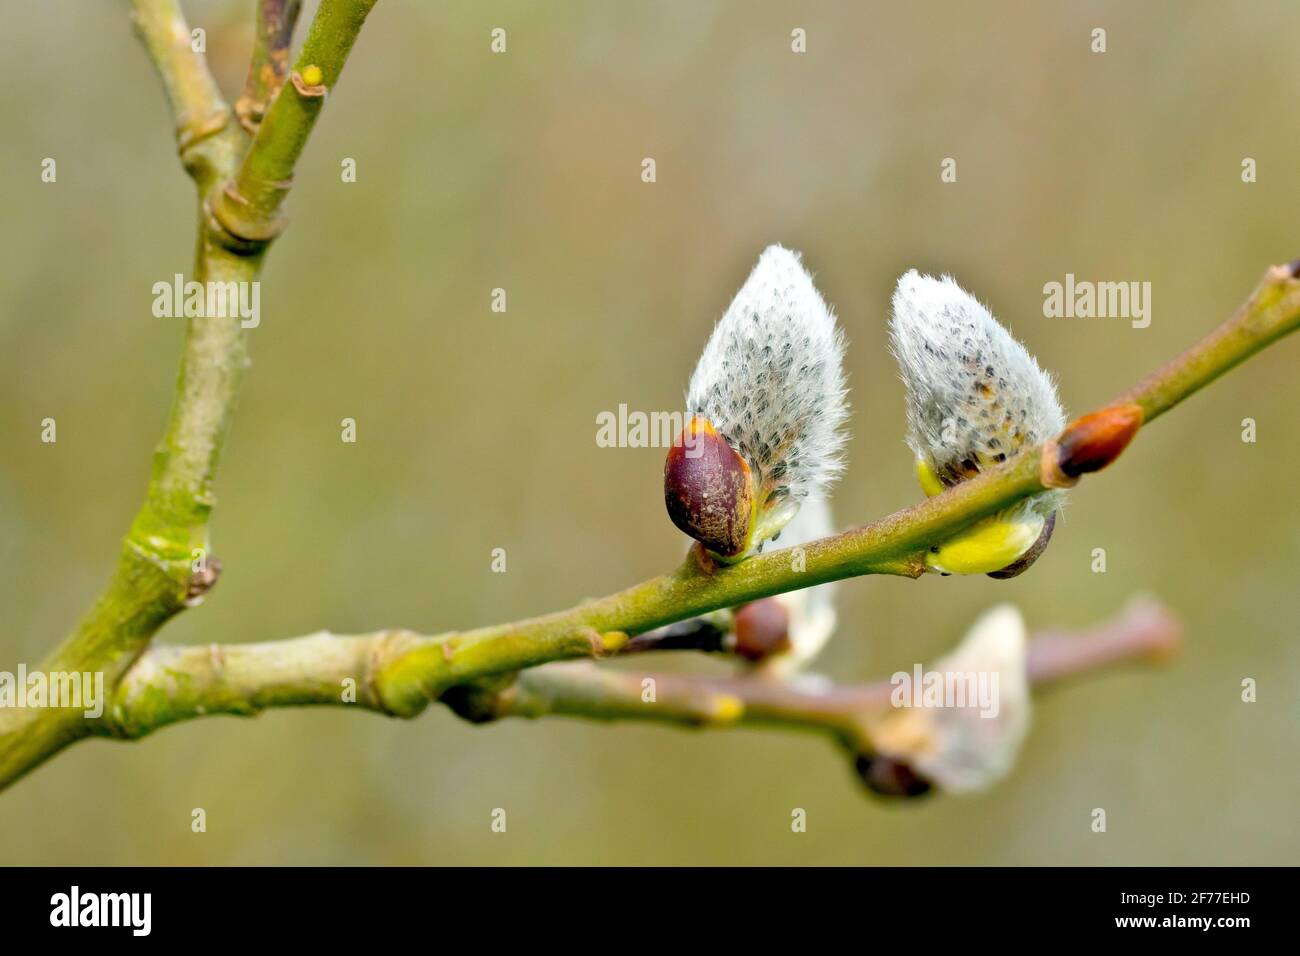 Pussy Willow (salix caprea), also known as Goat Willow or Great Sallow, close up showing a branch with two fluffy flower buds on the verge of opening. Stock Photo